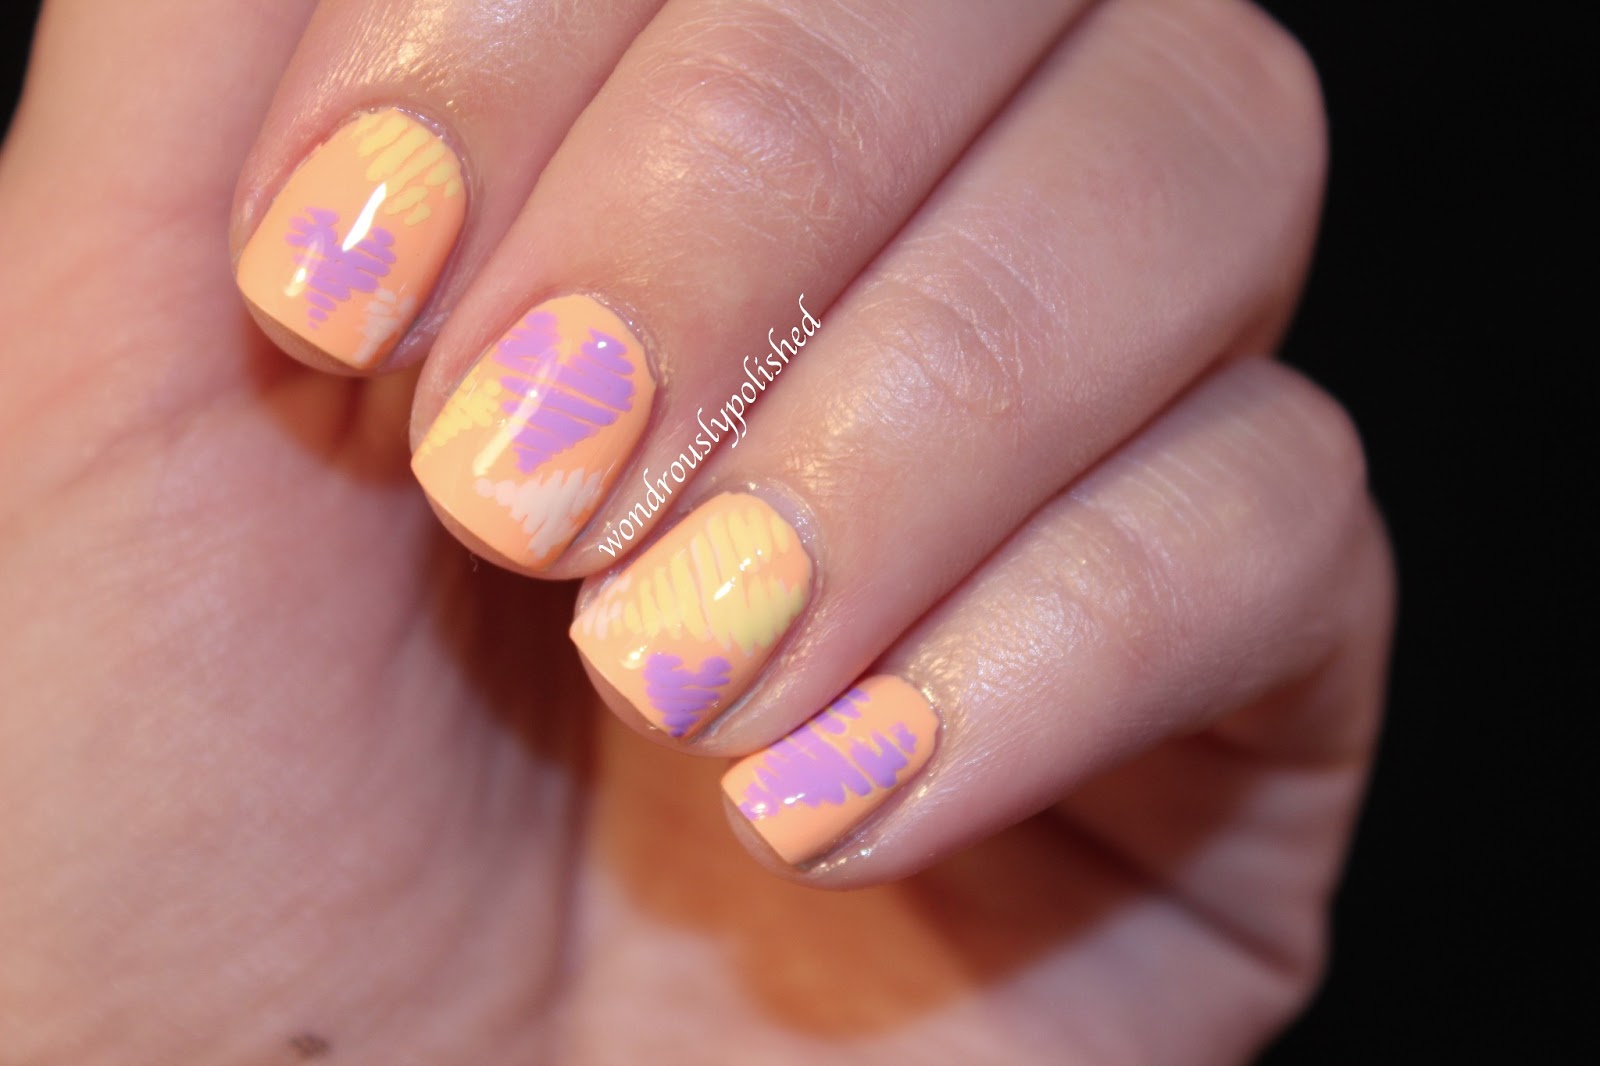 8. "February Nail Color Inspiration" - wide 6